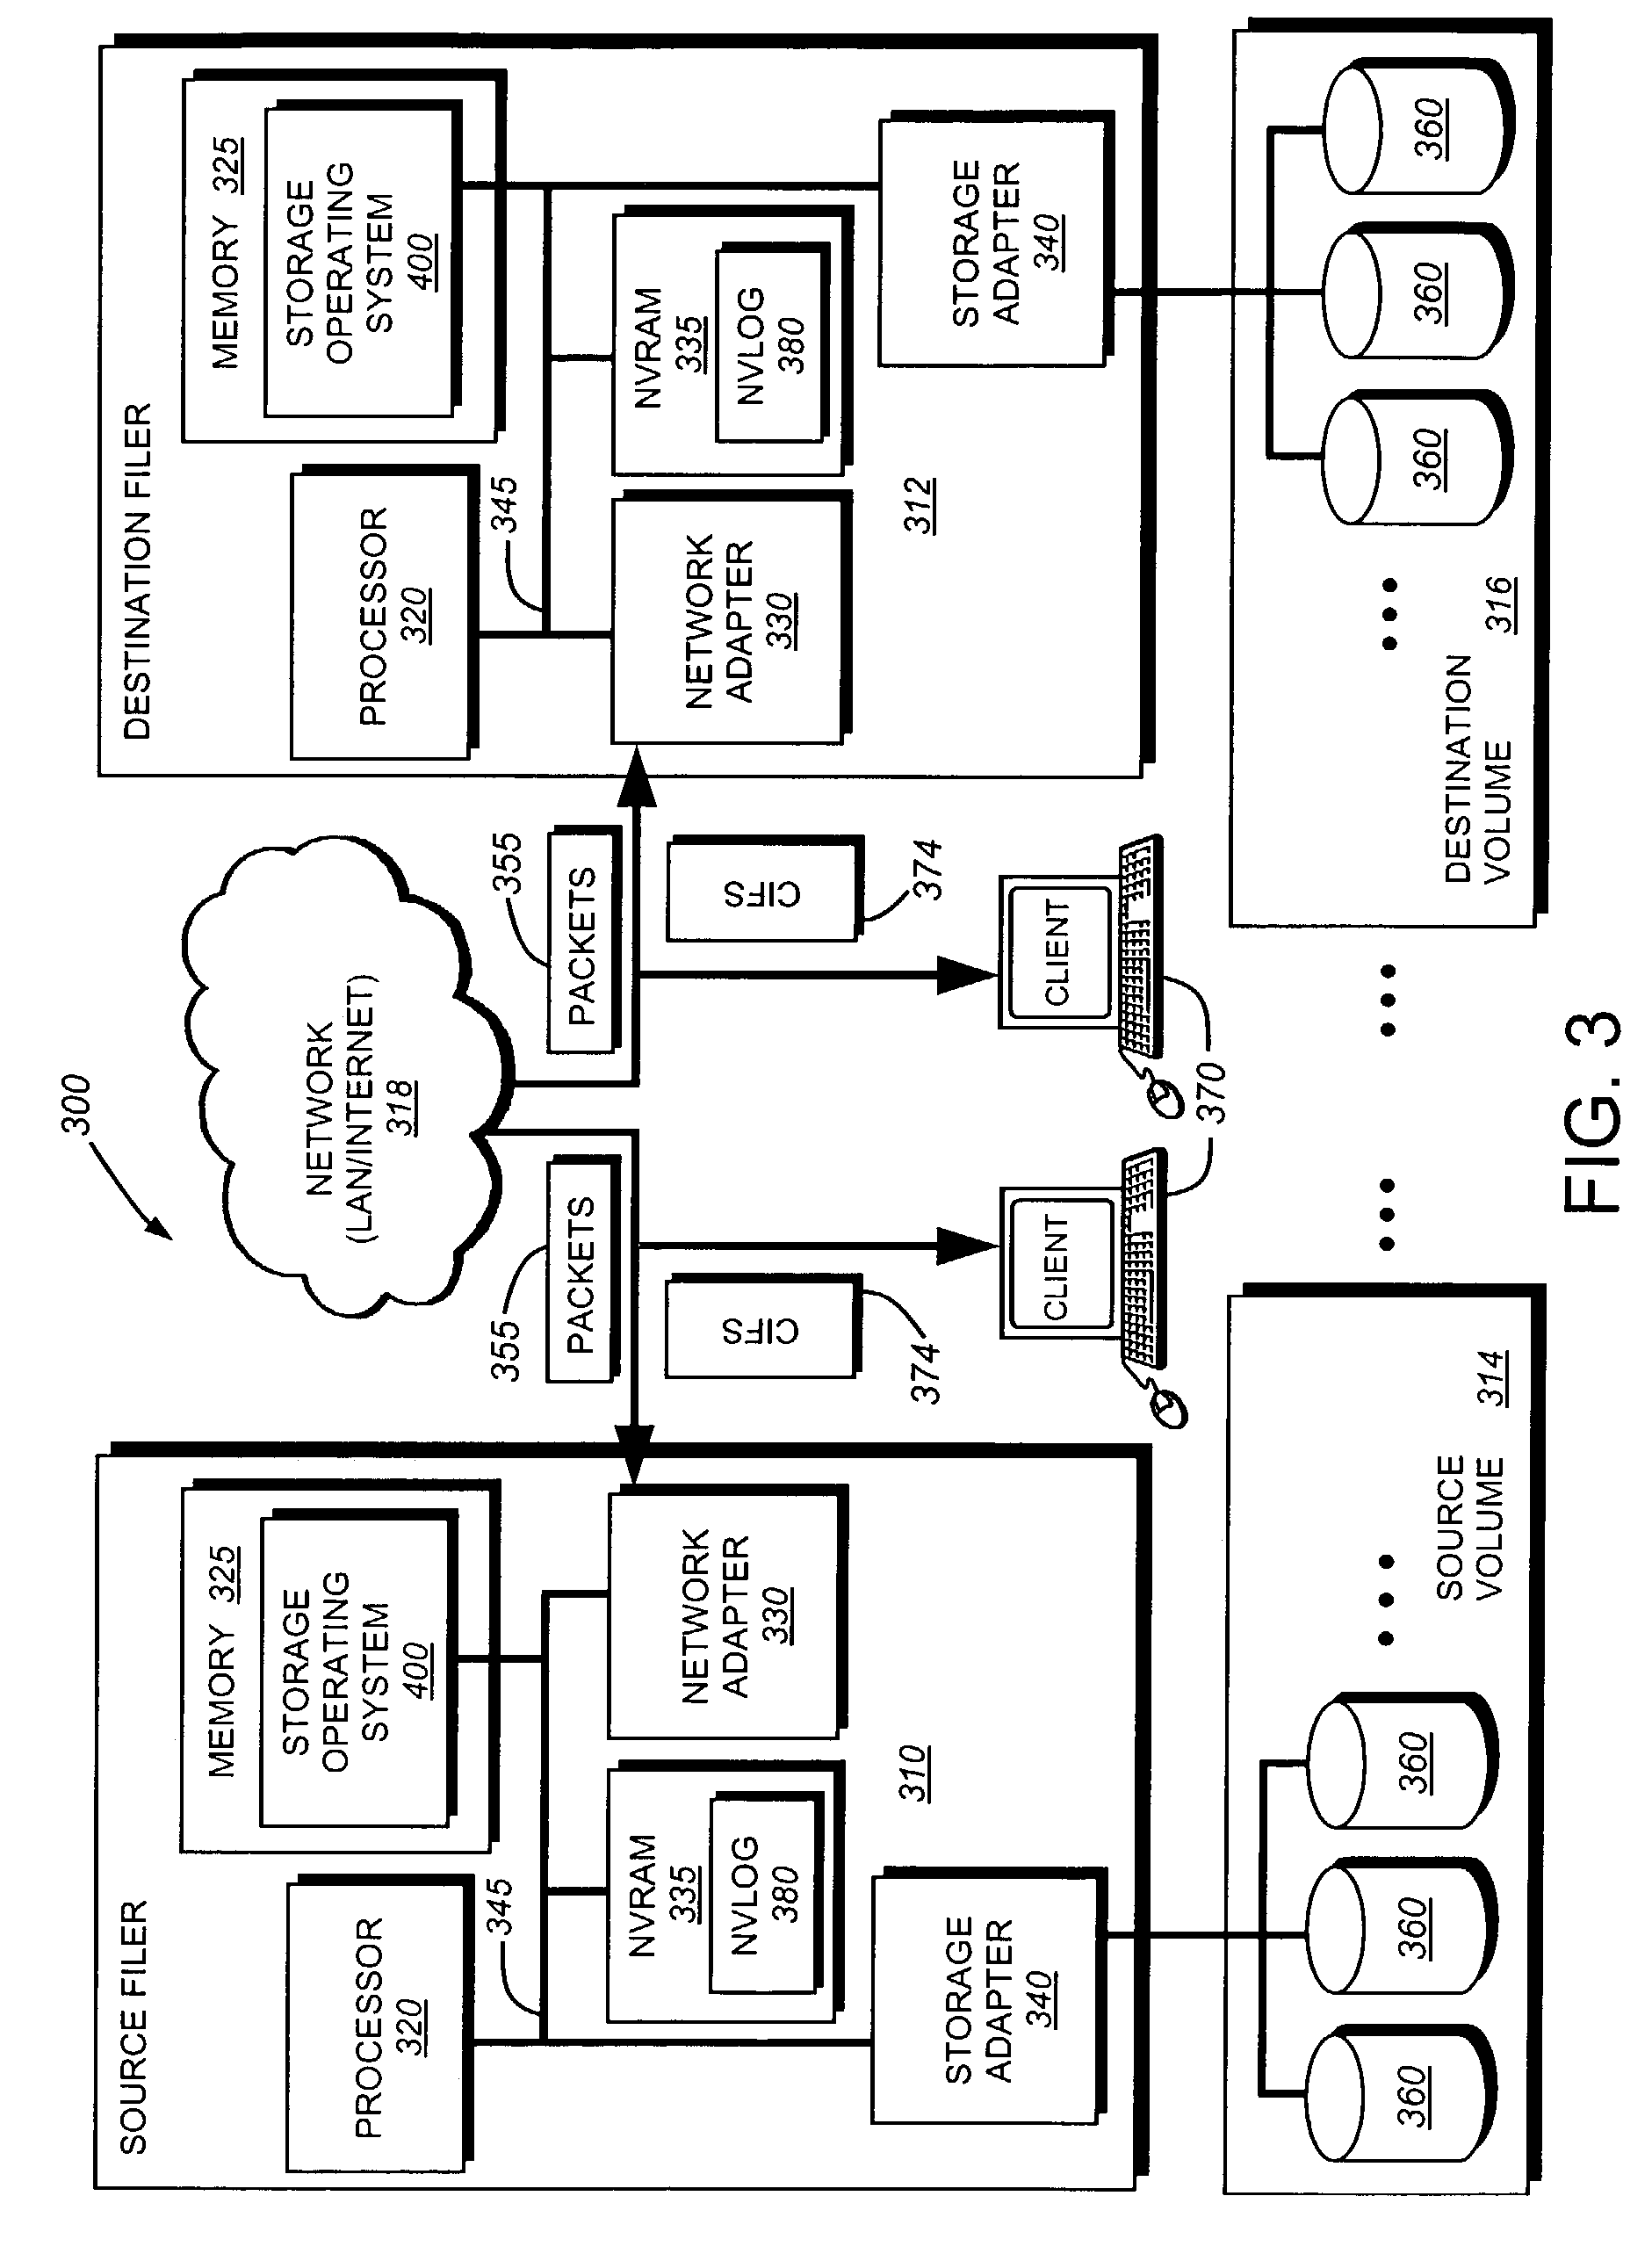 System and method for asynchronous mirroring of snapshots at a destination using a purgatory directory and inode mapping